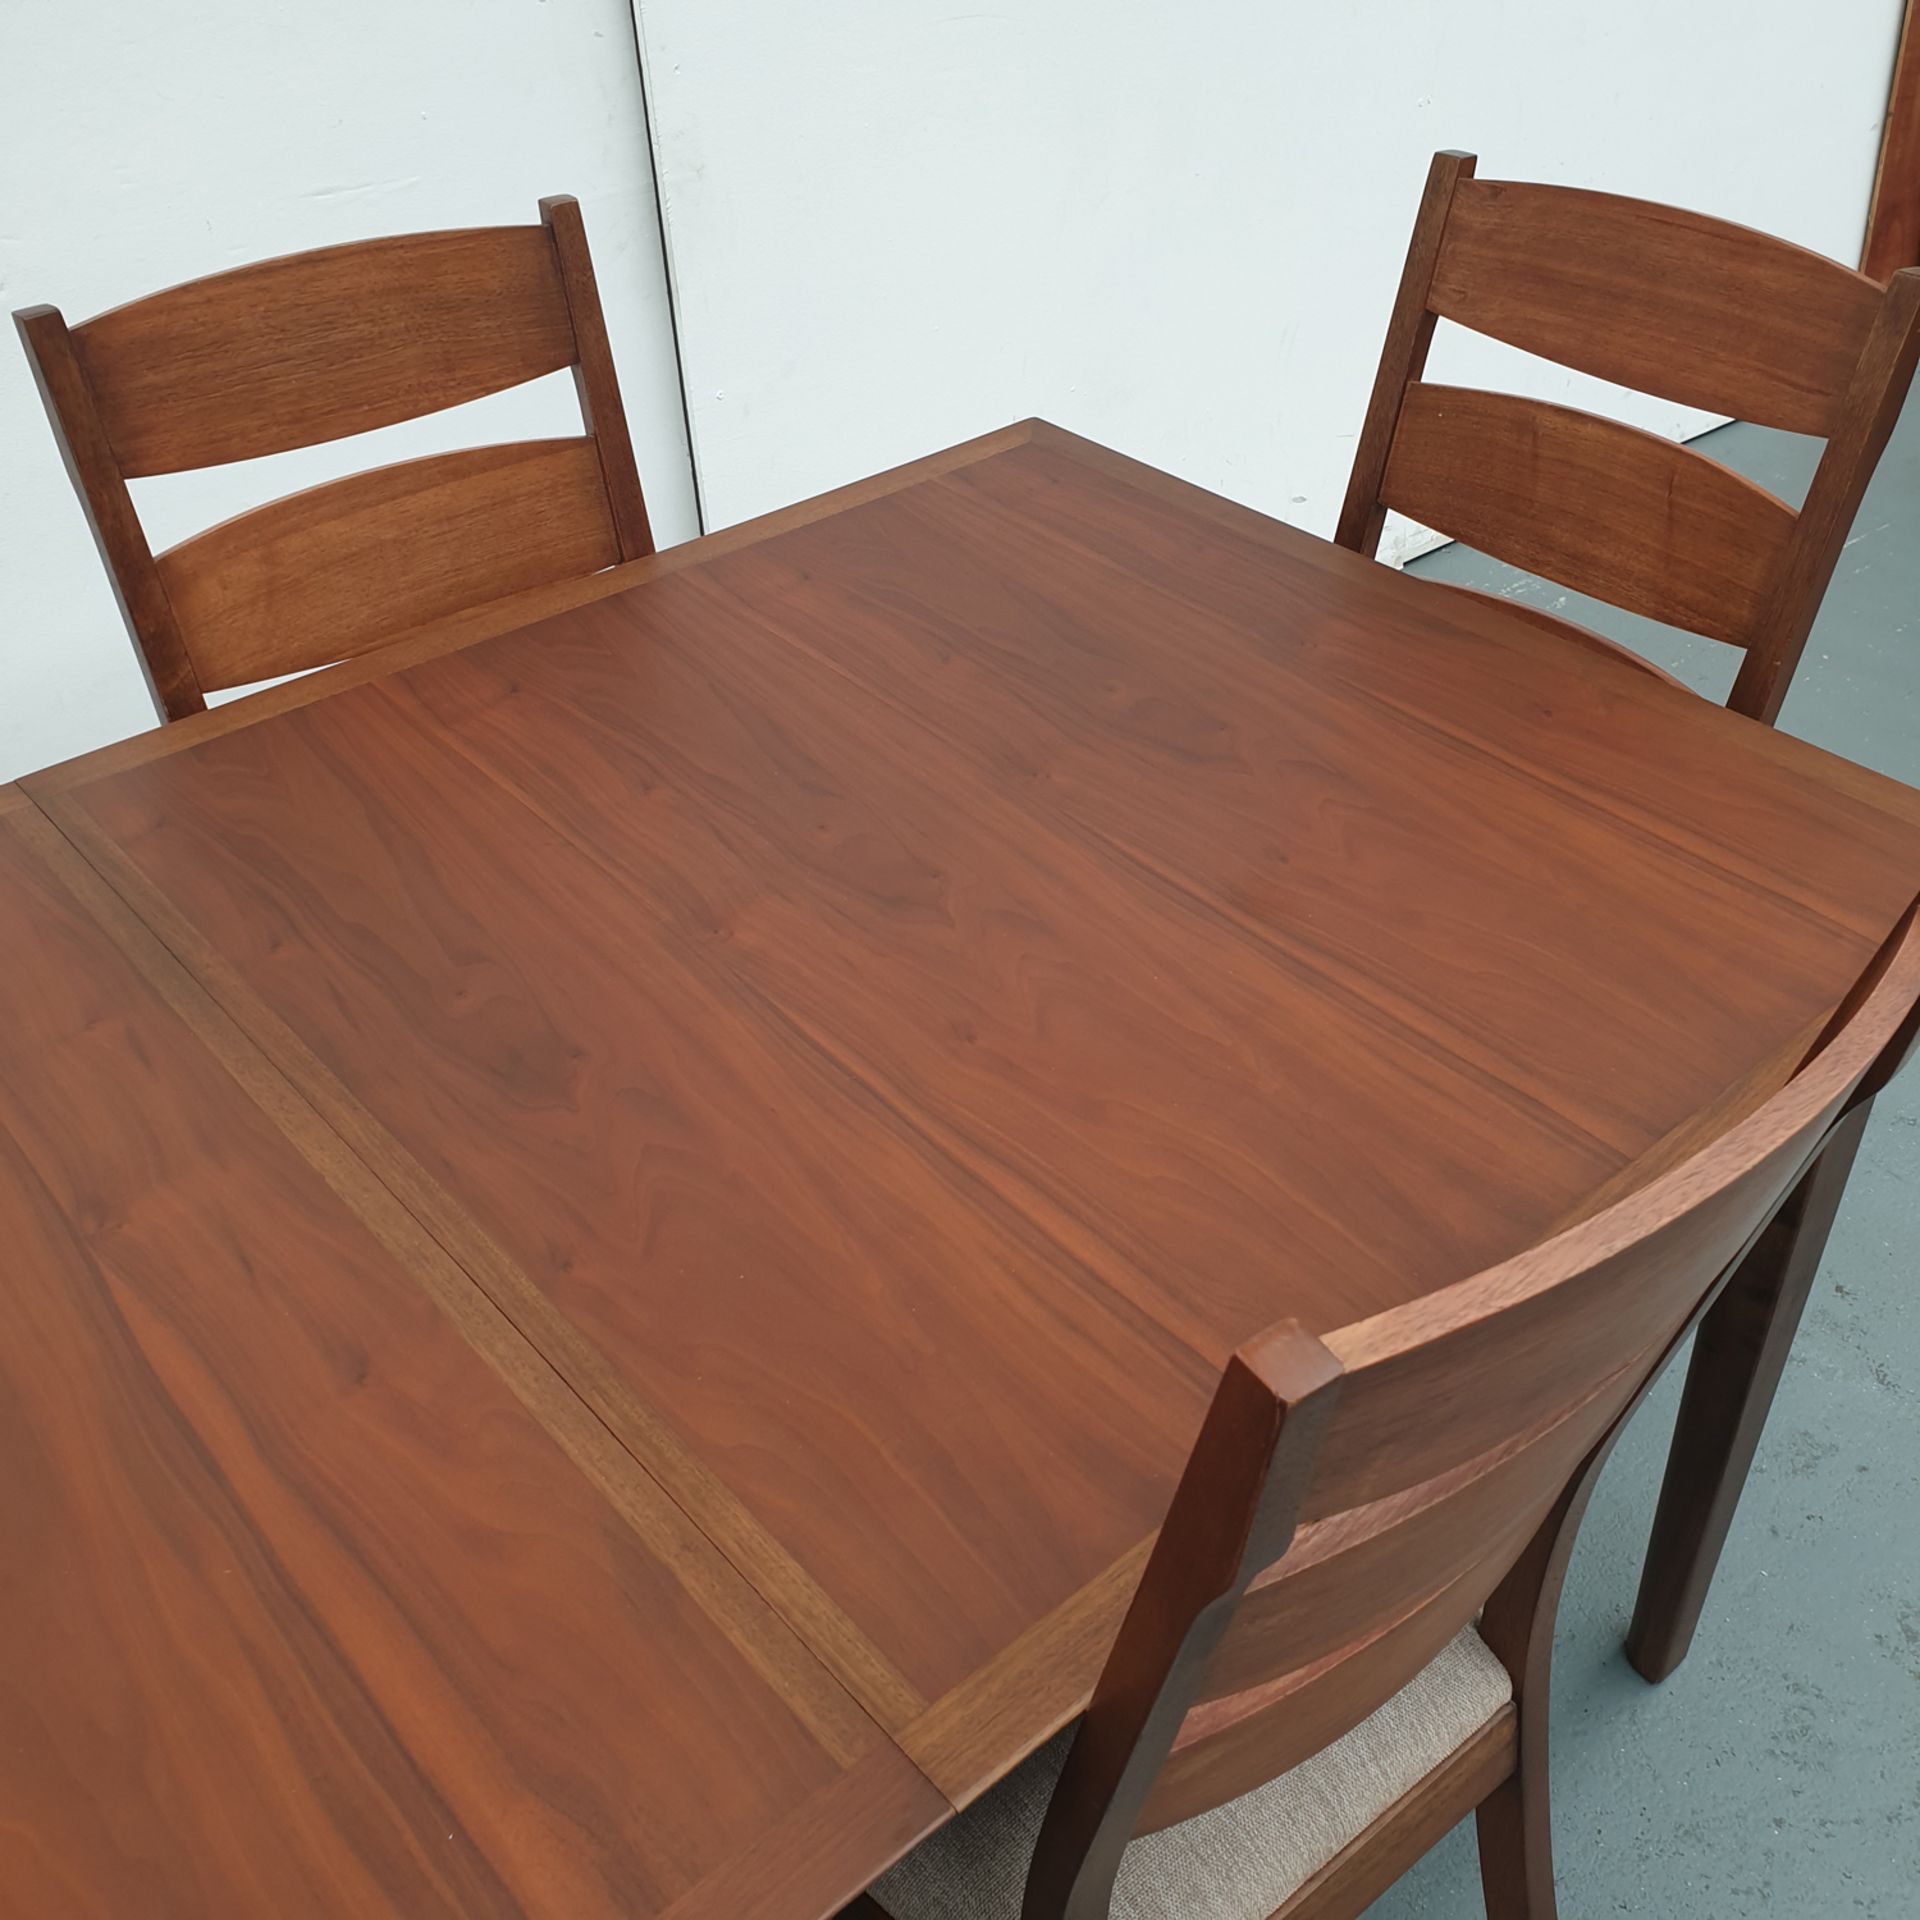 Solid Wood Dining Table & Chairs. Approx Dimensions 1700mm x 900mm x 780mm High. - Image 6 of 11